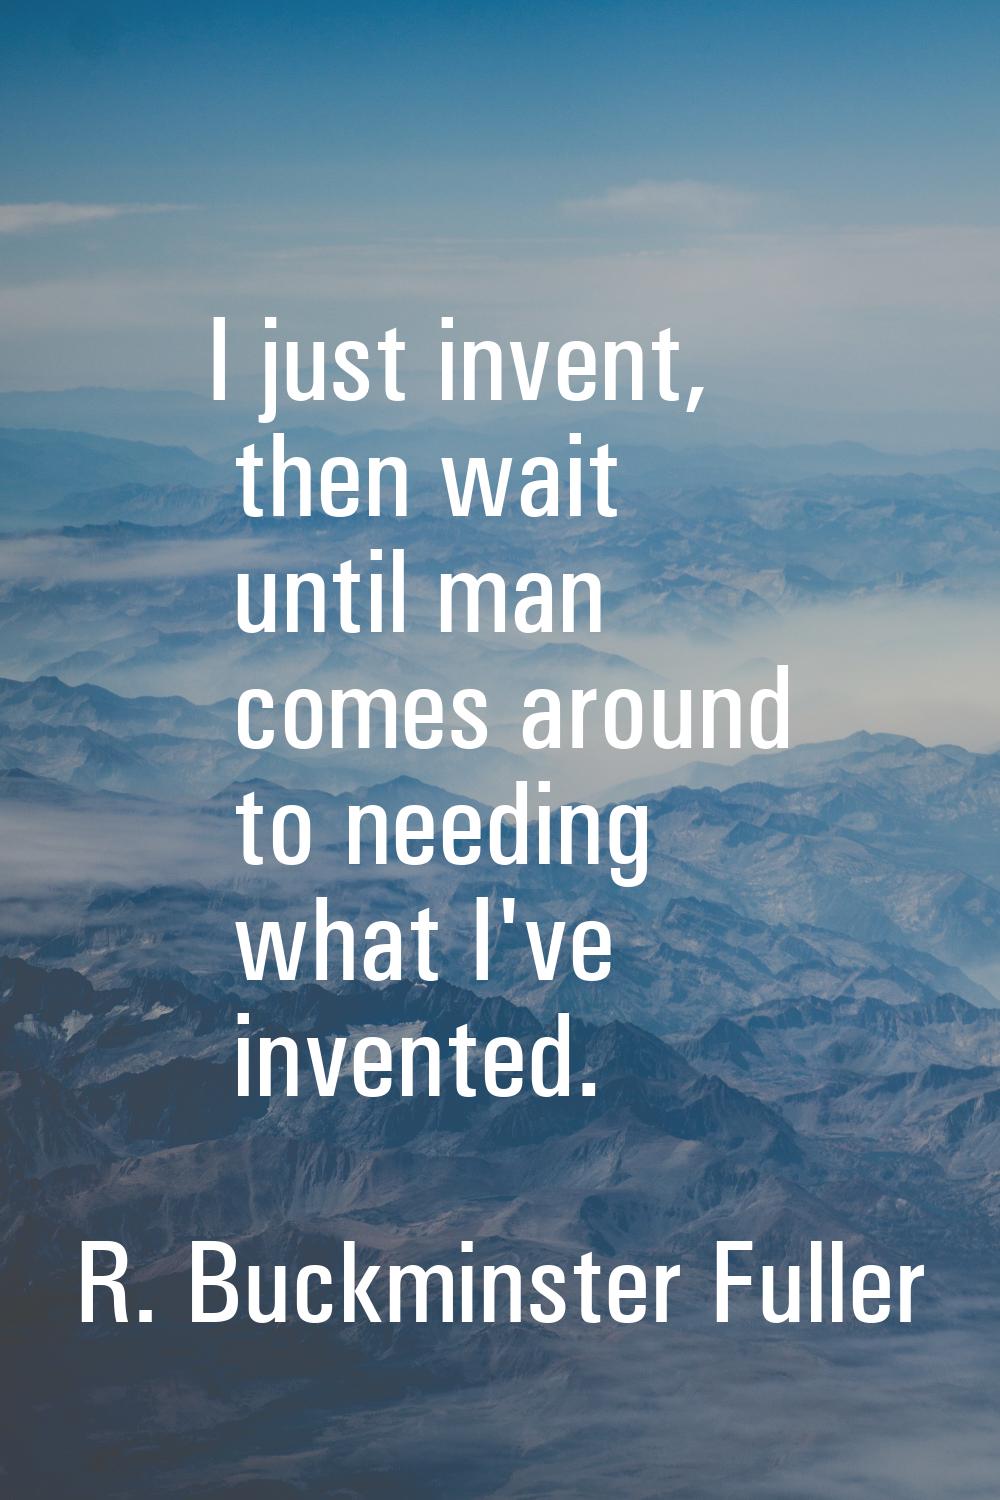 I just invent, then wait until man comes around to needing what I've invented.